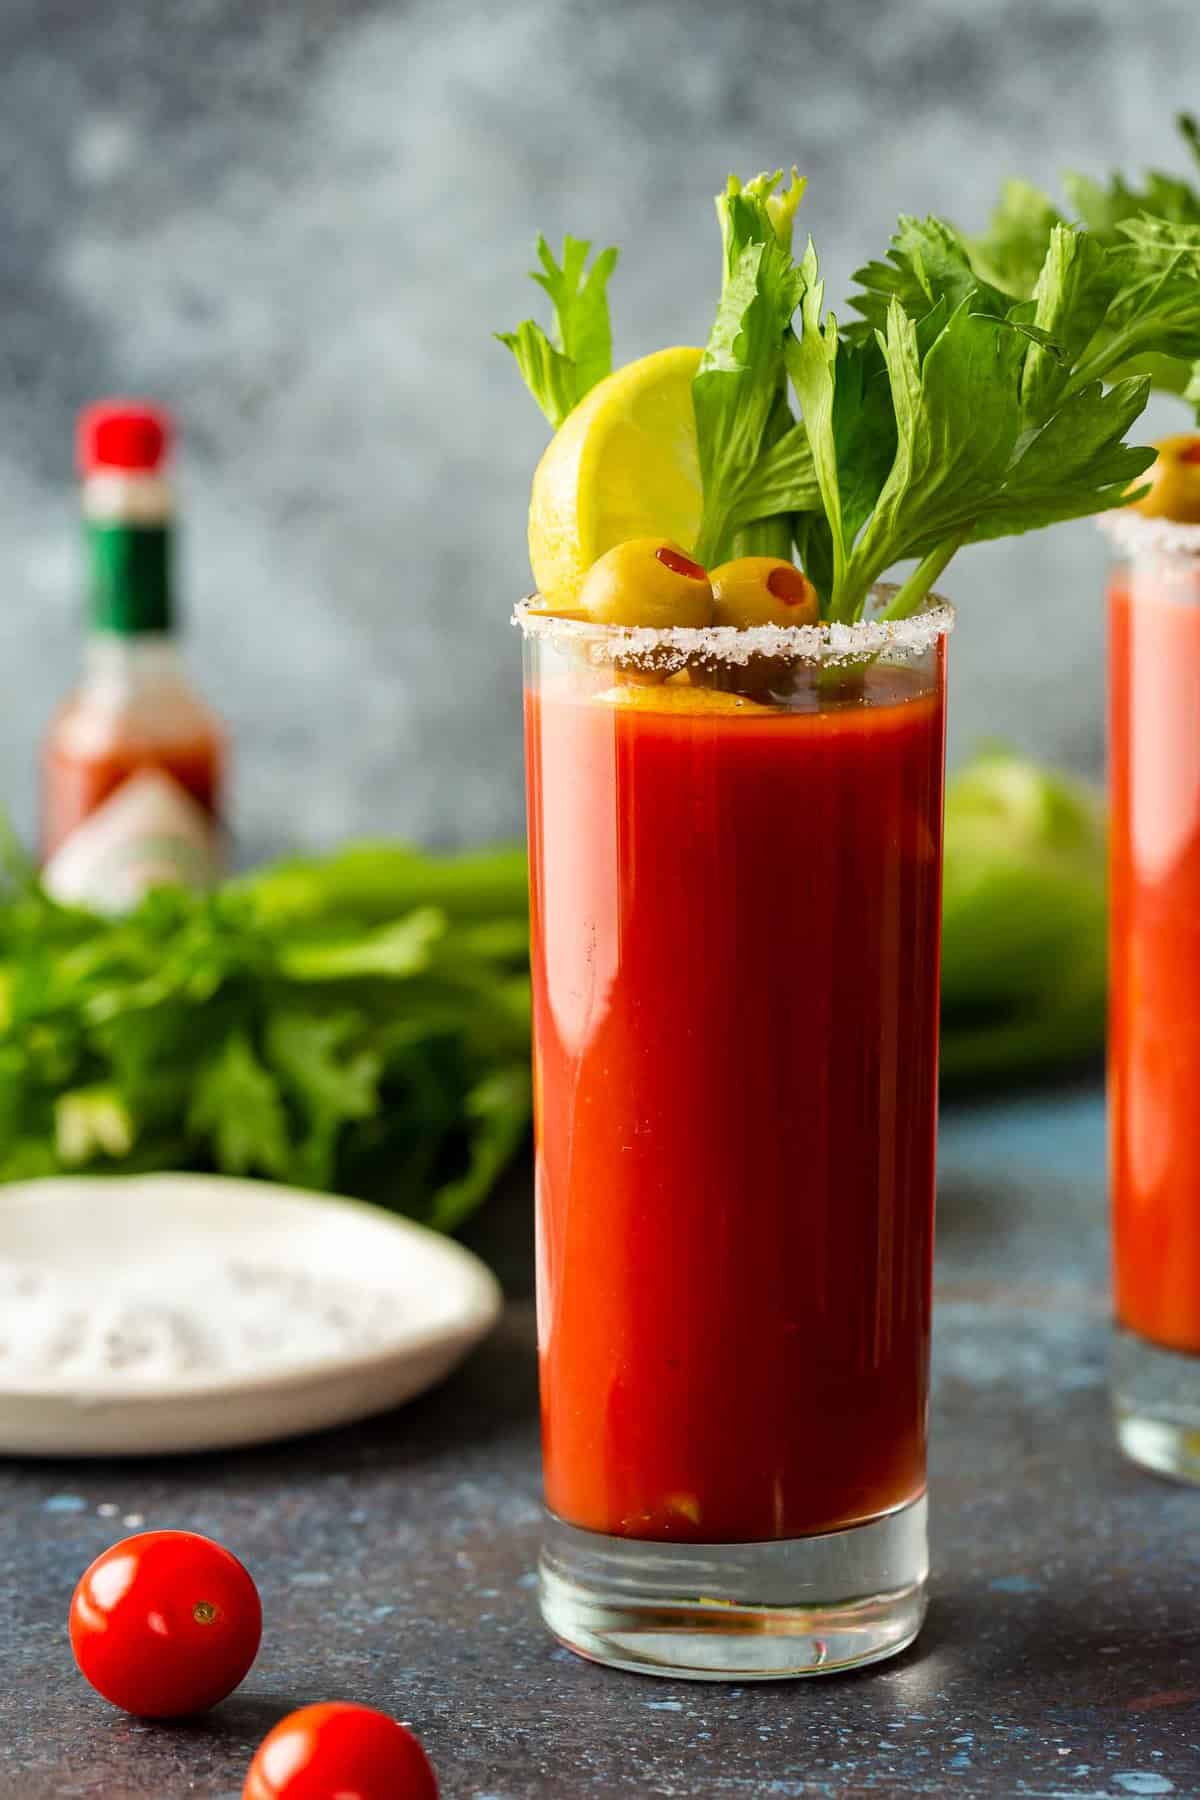 https://www.thecookierookie.com/wp-content/uploads/2014/02/Stovetop-Bloody-Mary-4.jpg